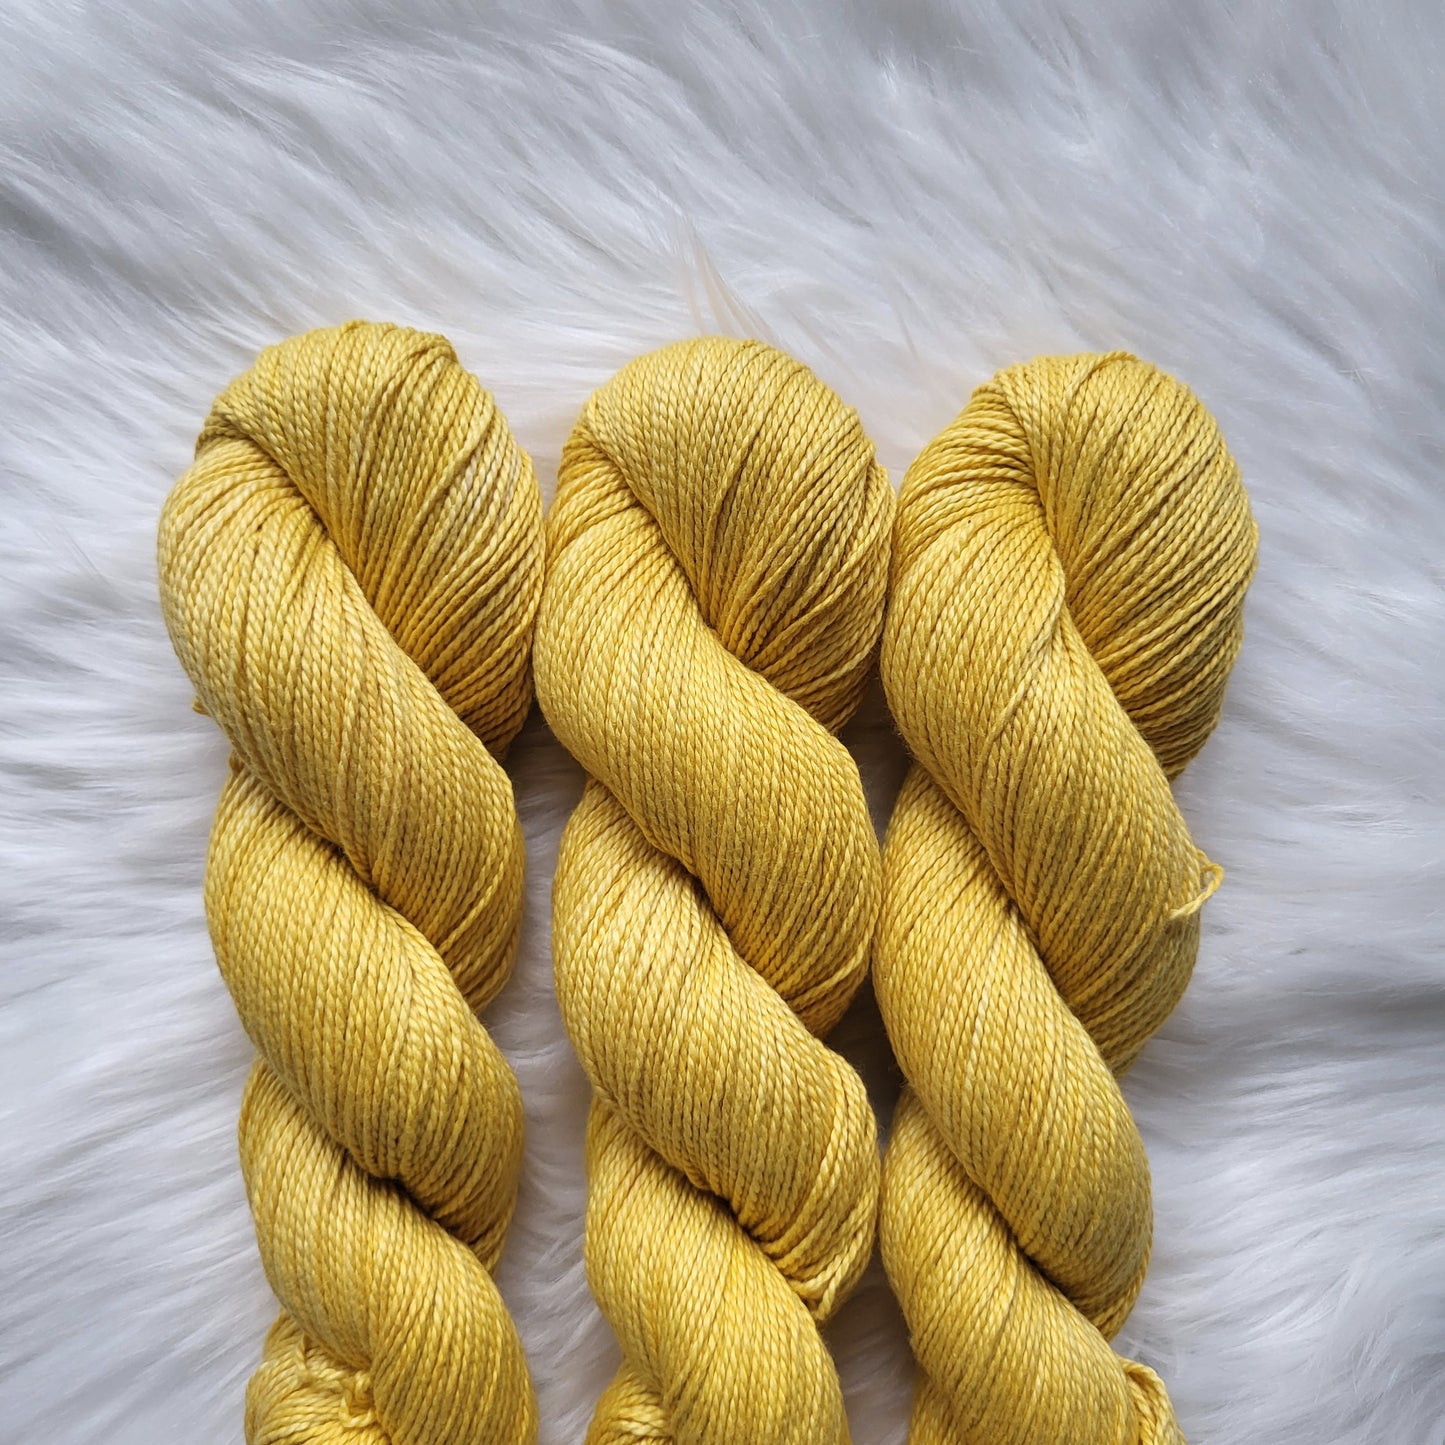 Hand-dyed pima cotton yarn from Pittsburgh PA inspired by Dune by Frank Herbert